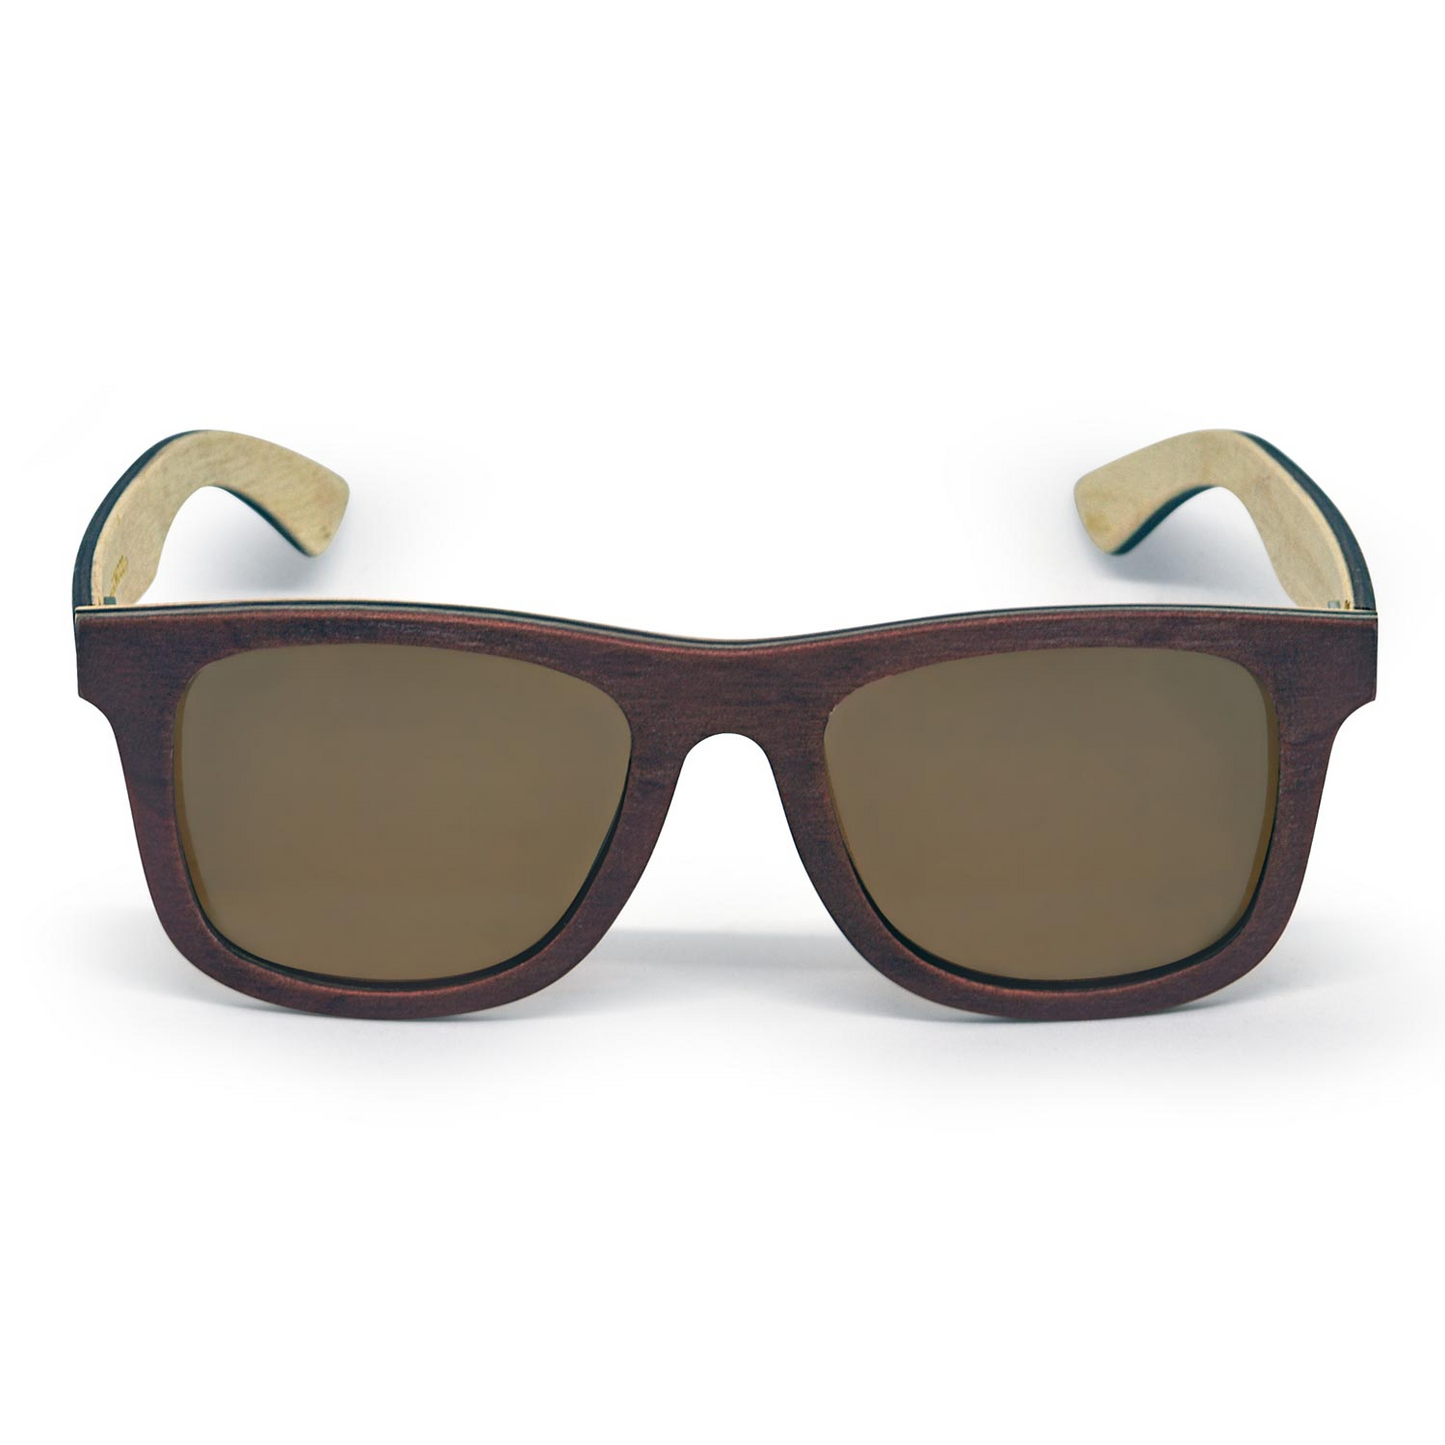 Canadian multi layer brown maple wood sunglasses